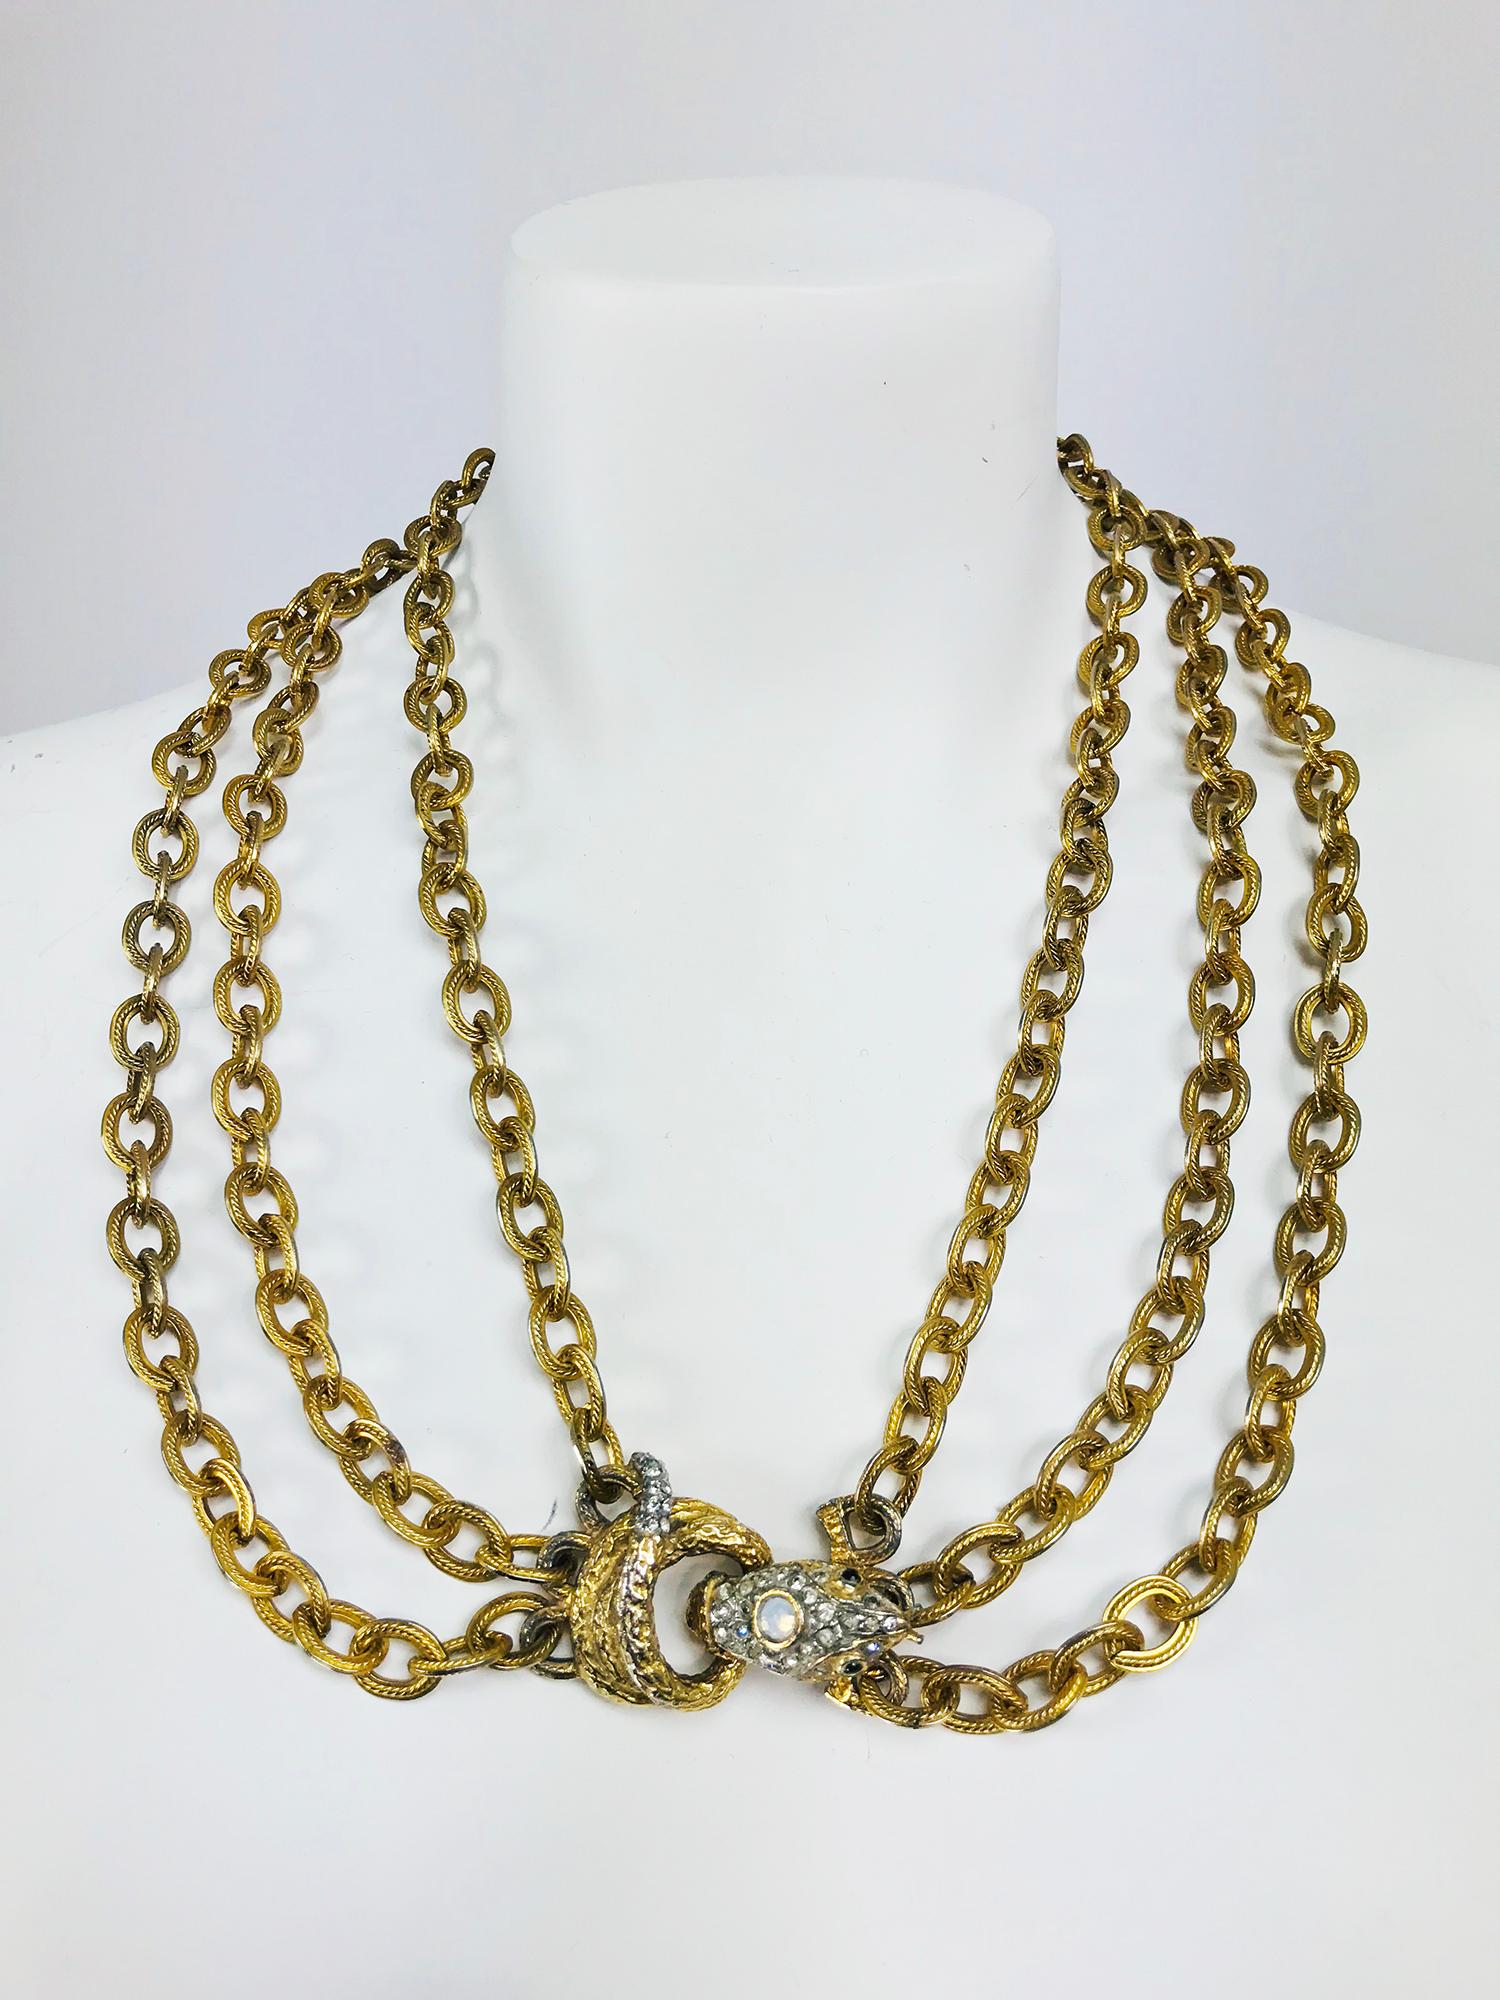 Snake Festoon Necklace in faux Gold and Rhinestone Vintage 5